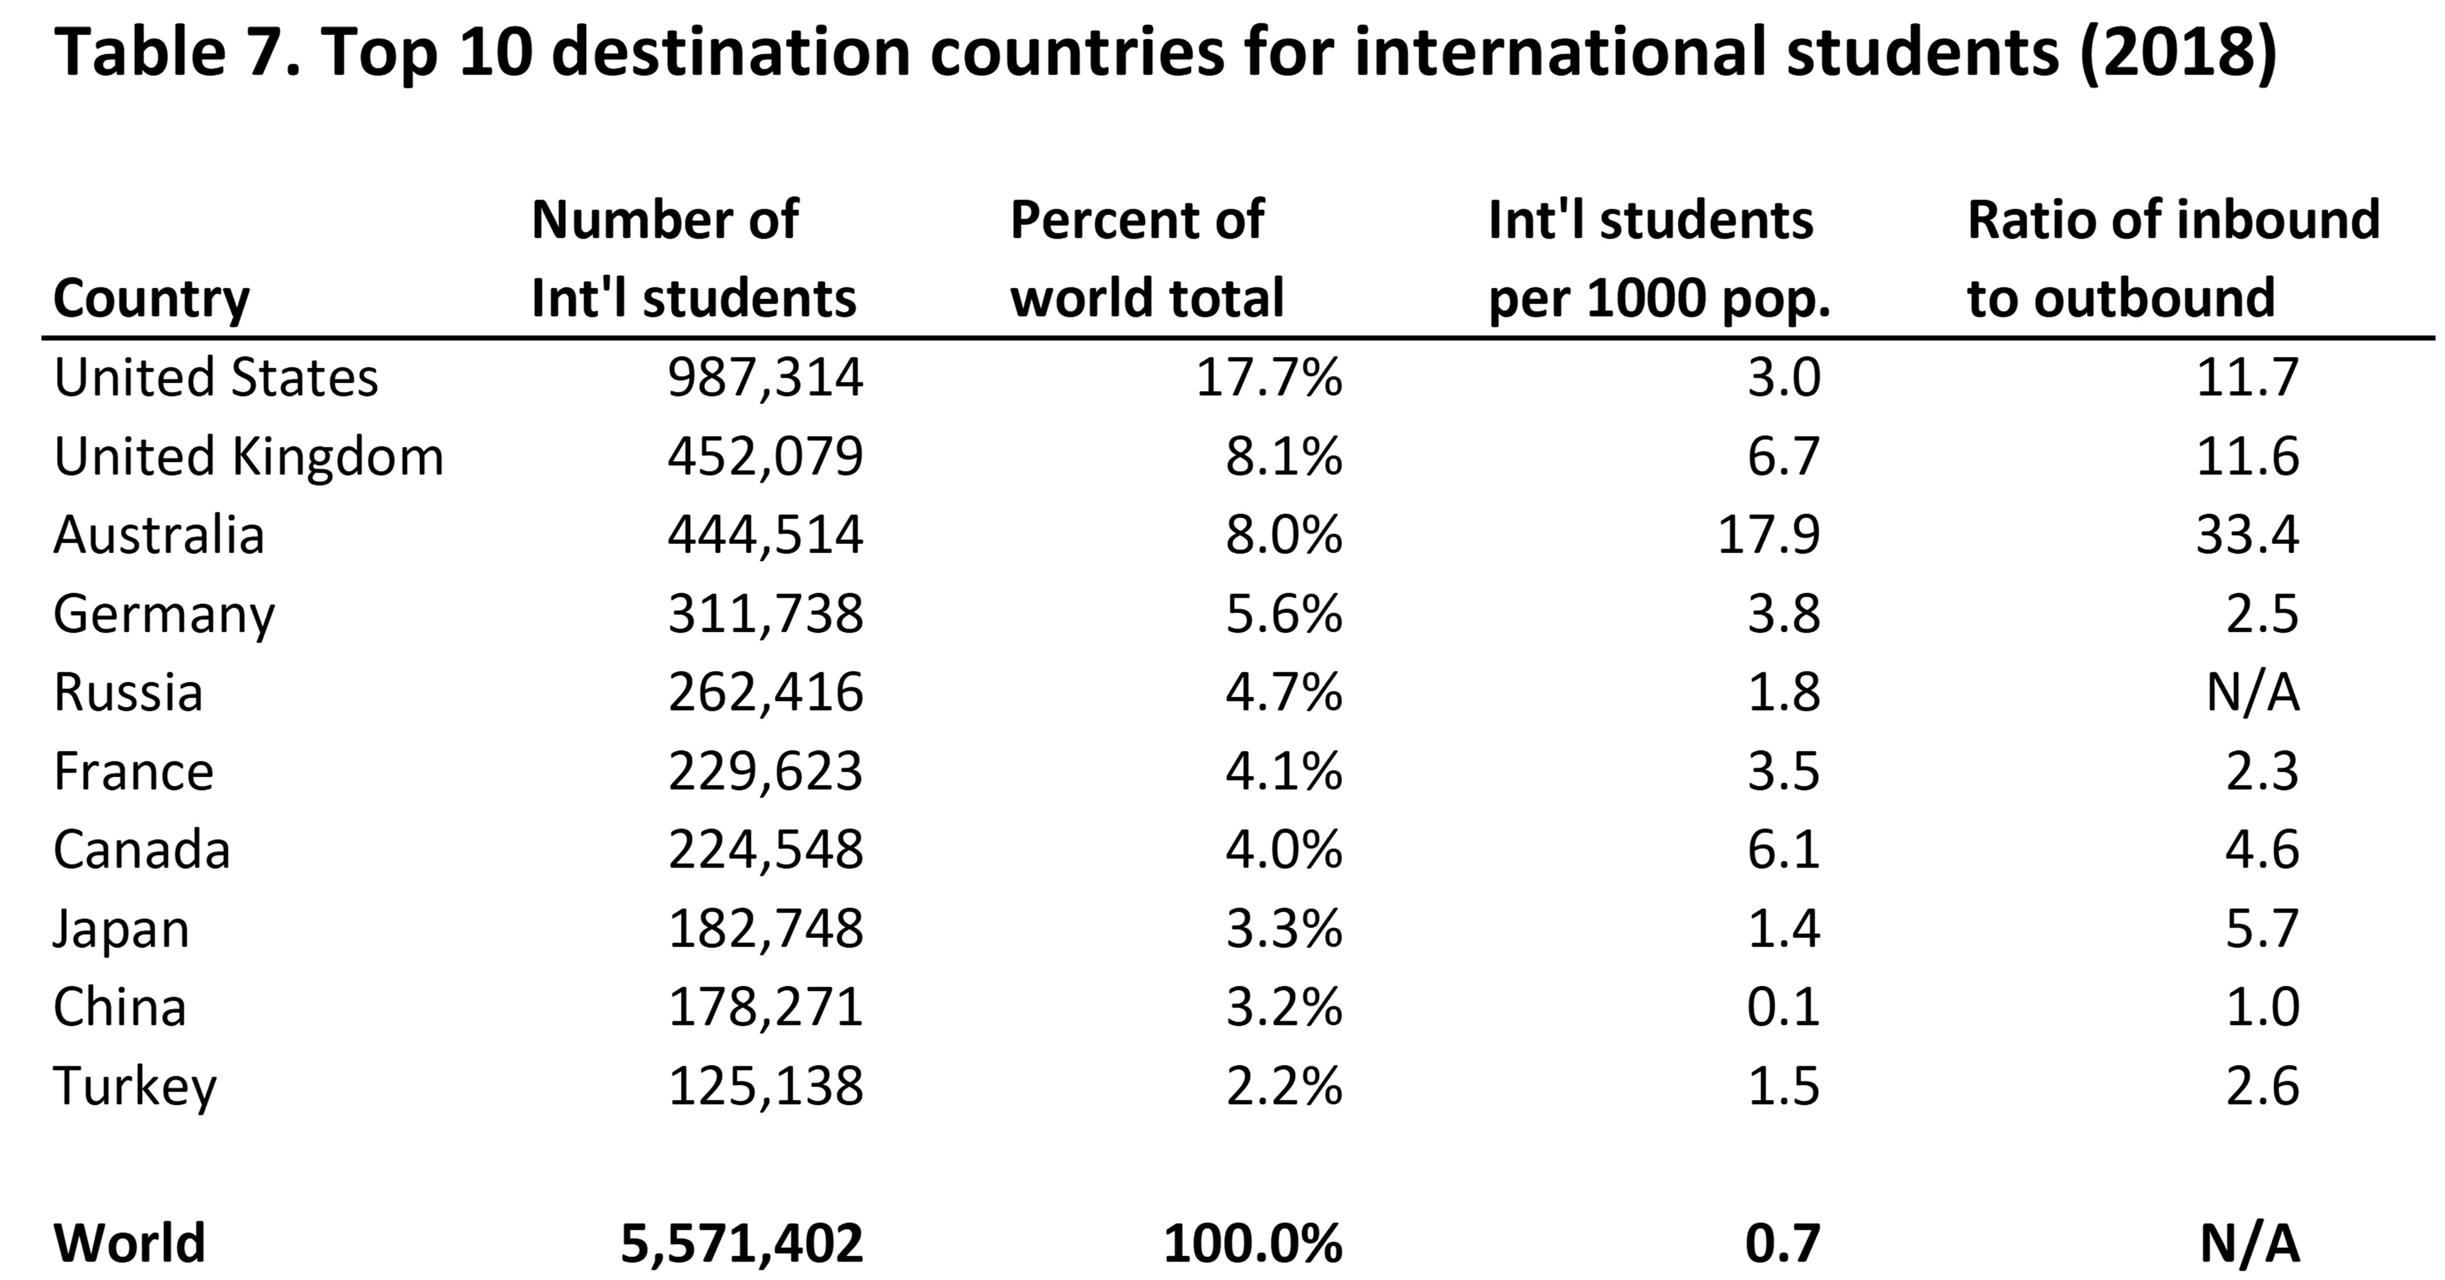 Top 10 destinations for international students